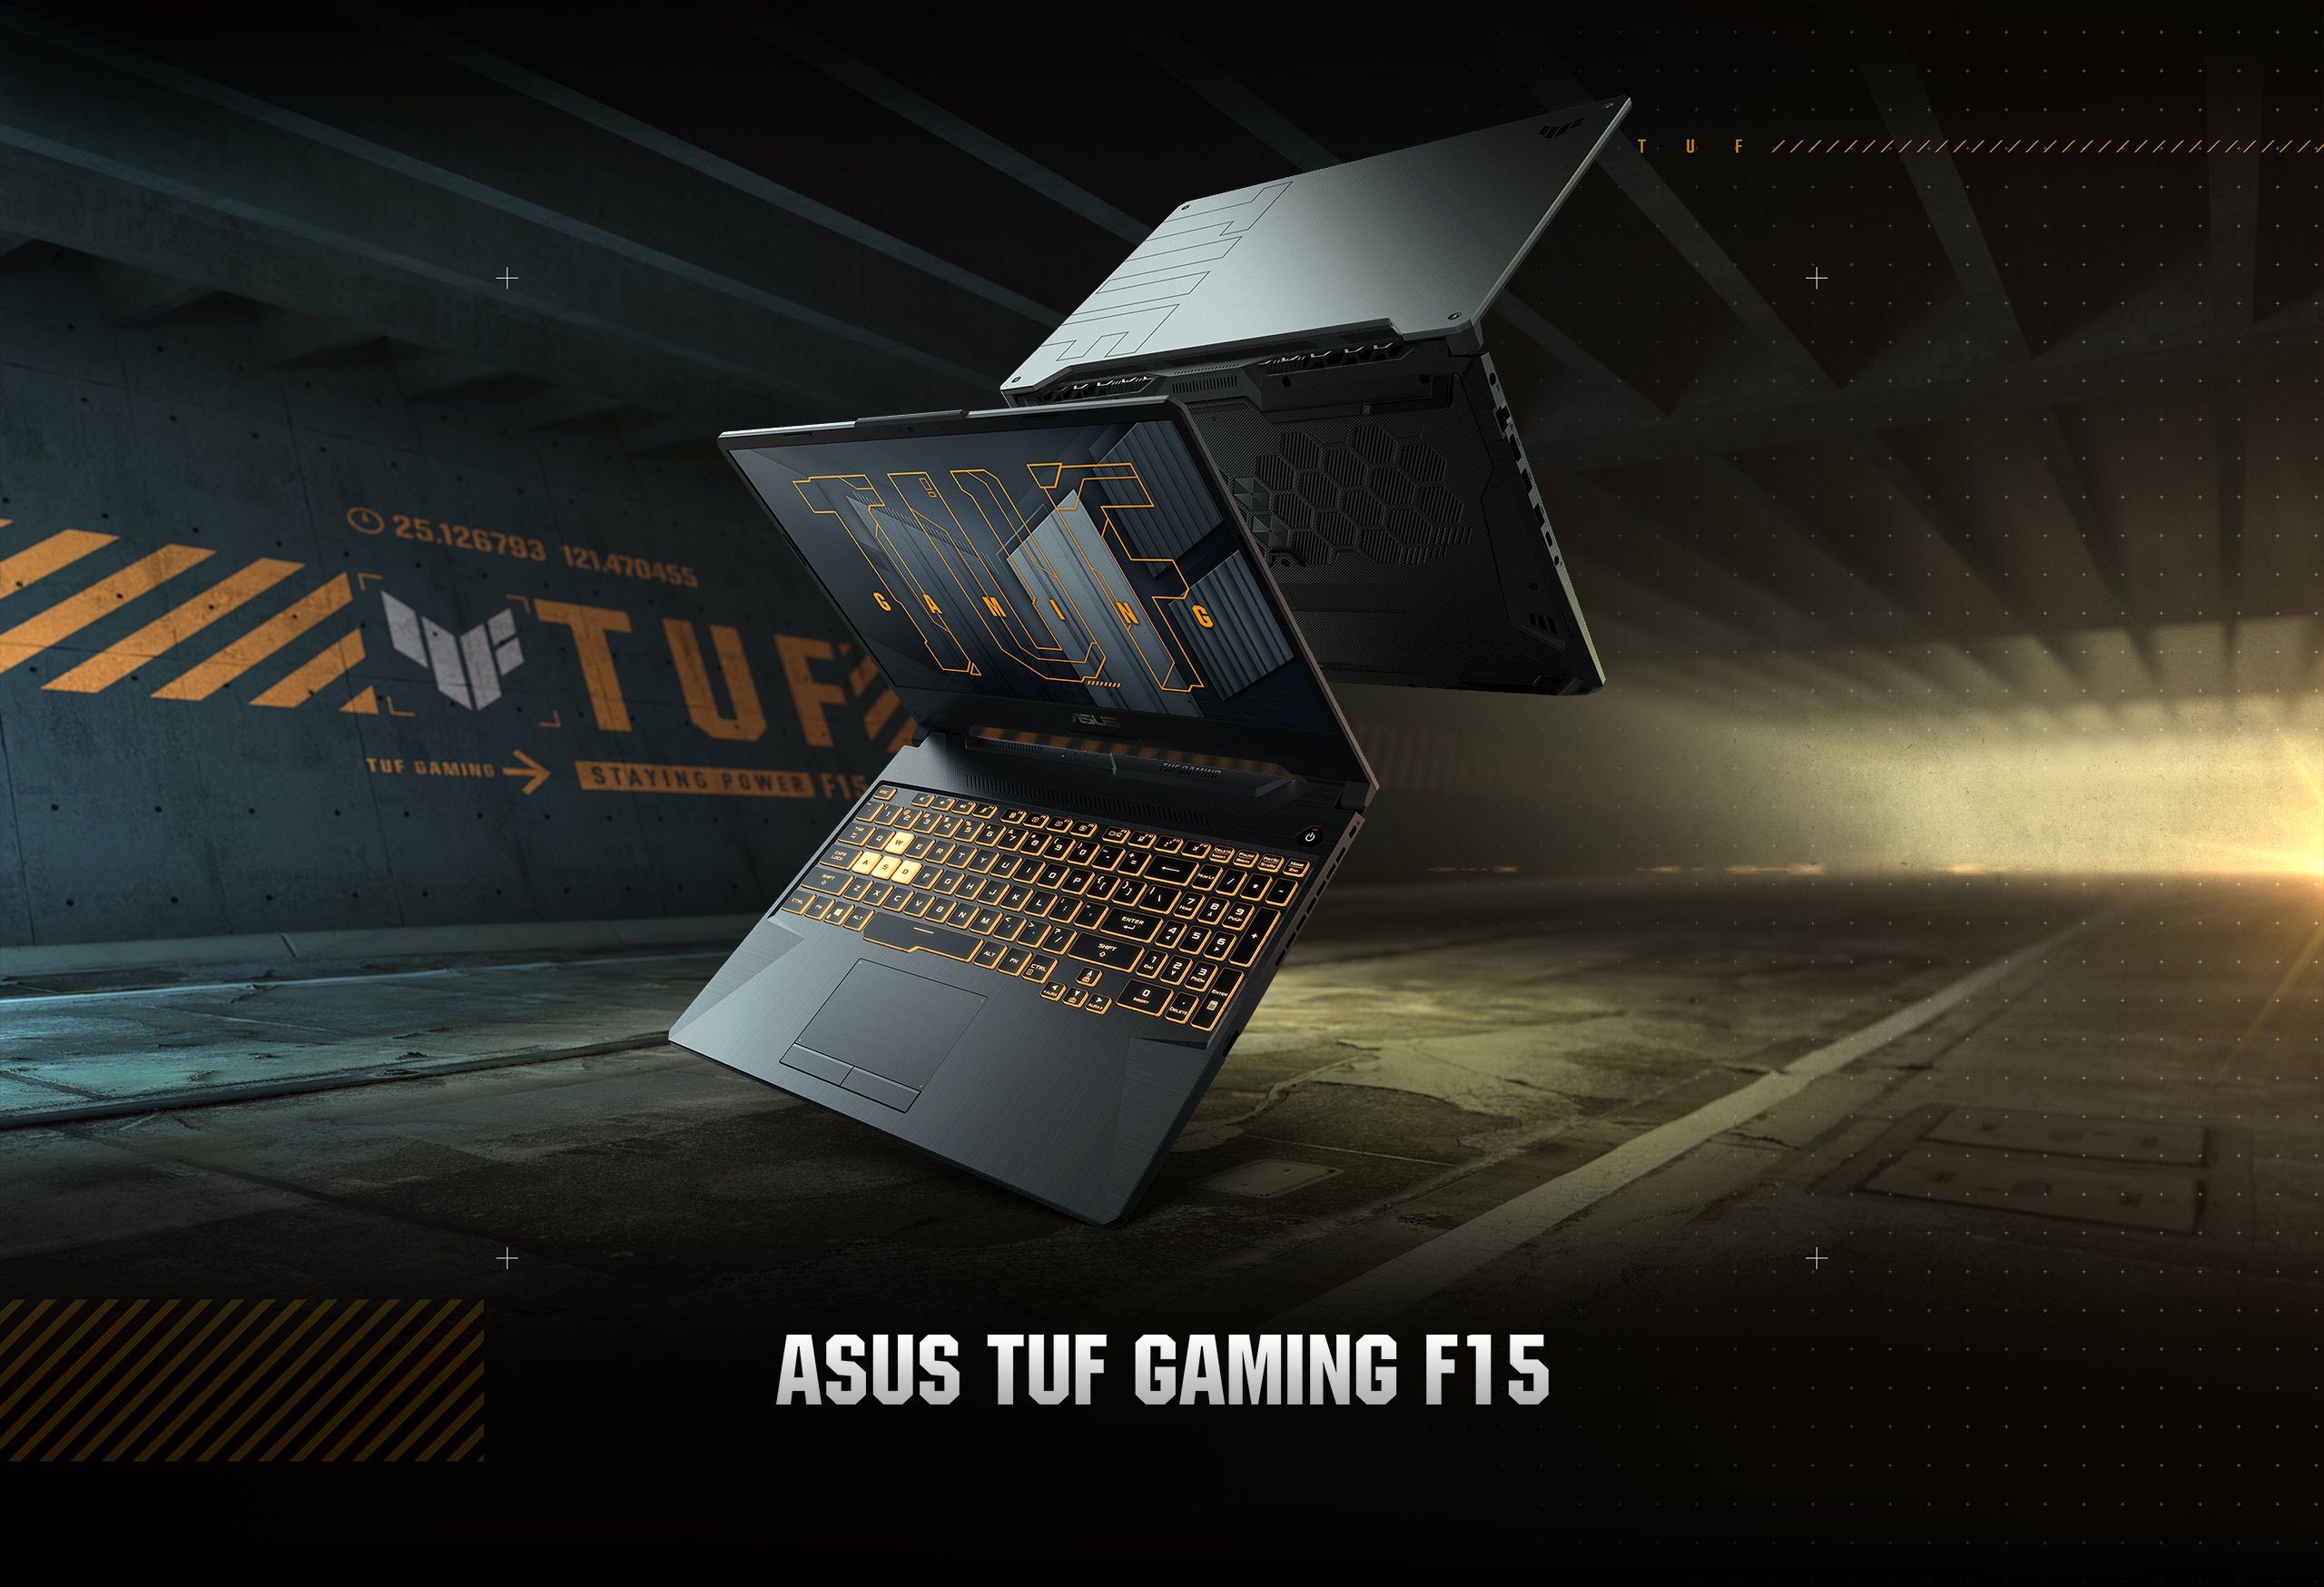 ASUS TUF Gaming F15 TUF506HE-DS74 - XOTIC PC